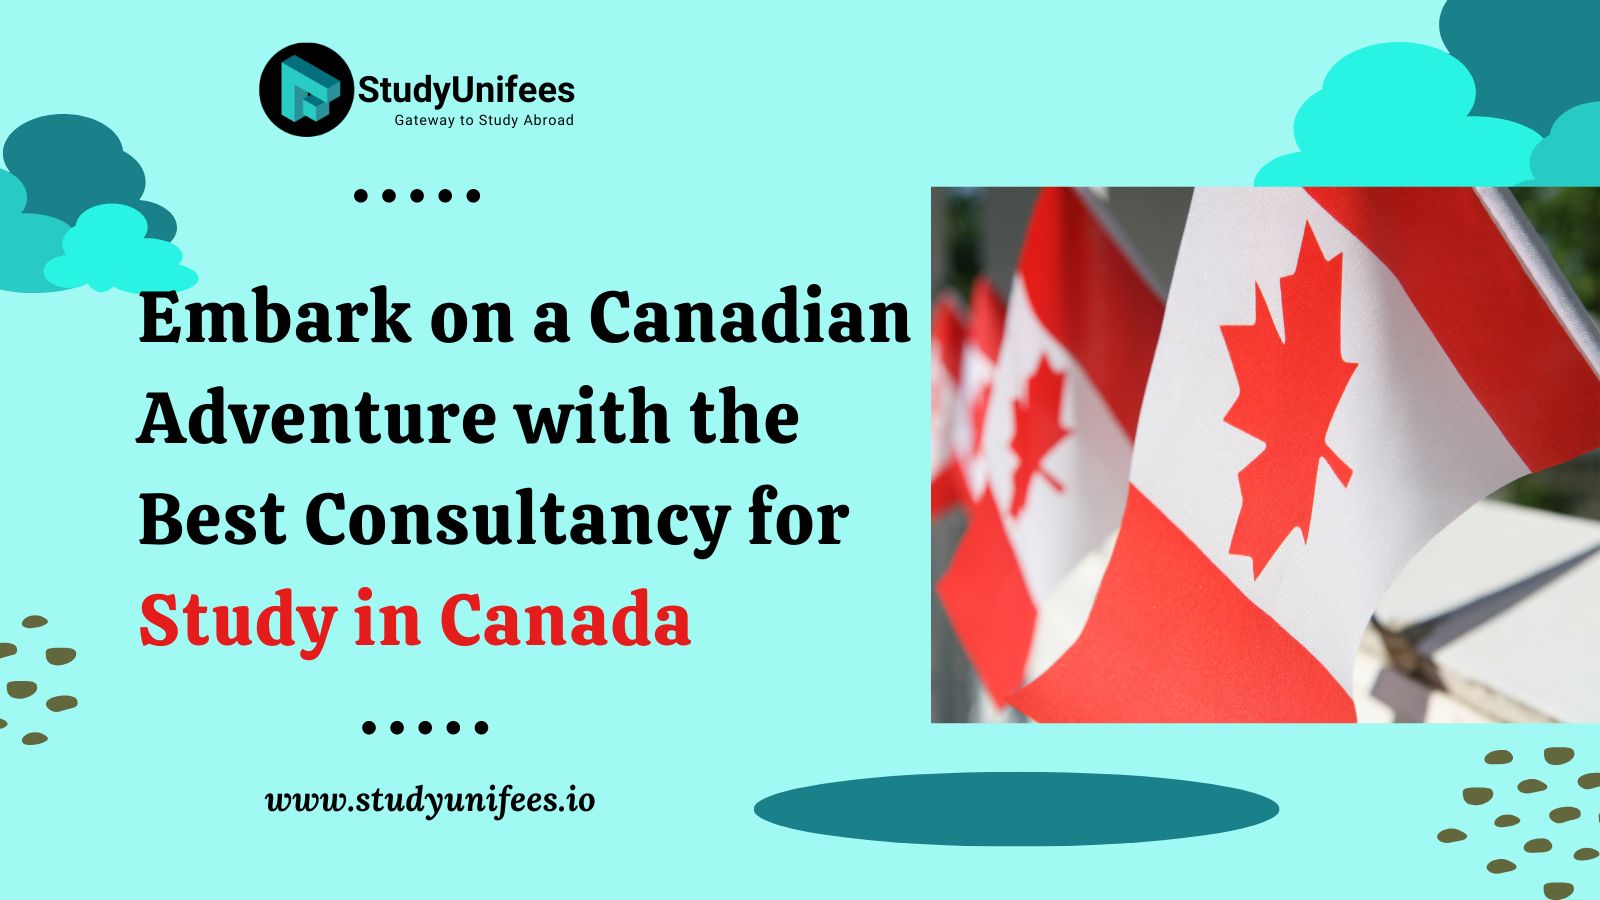 Best Consultancy for Study in Canada